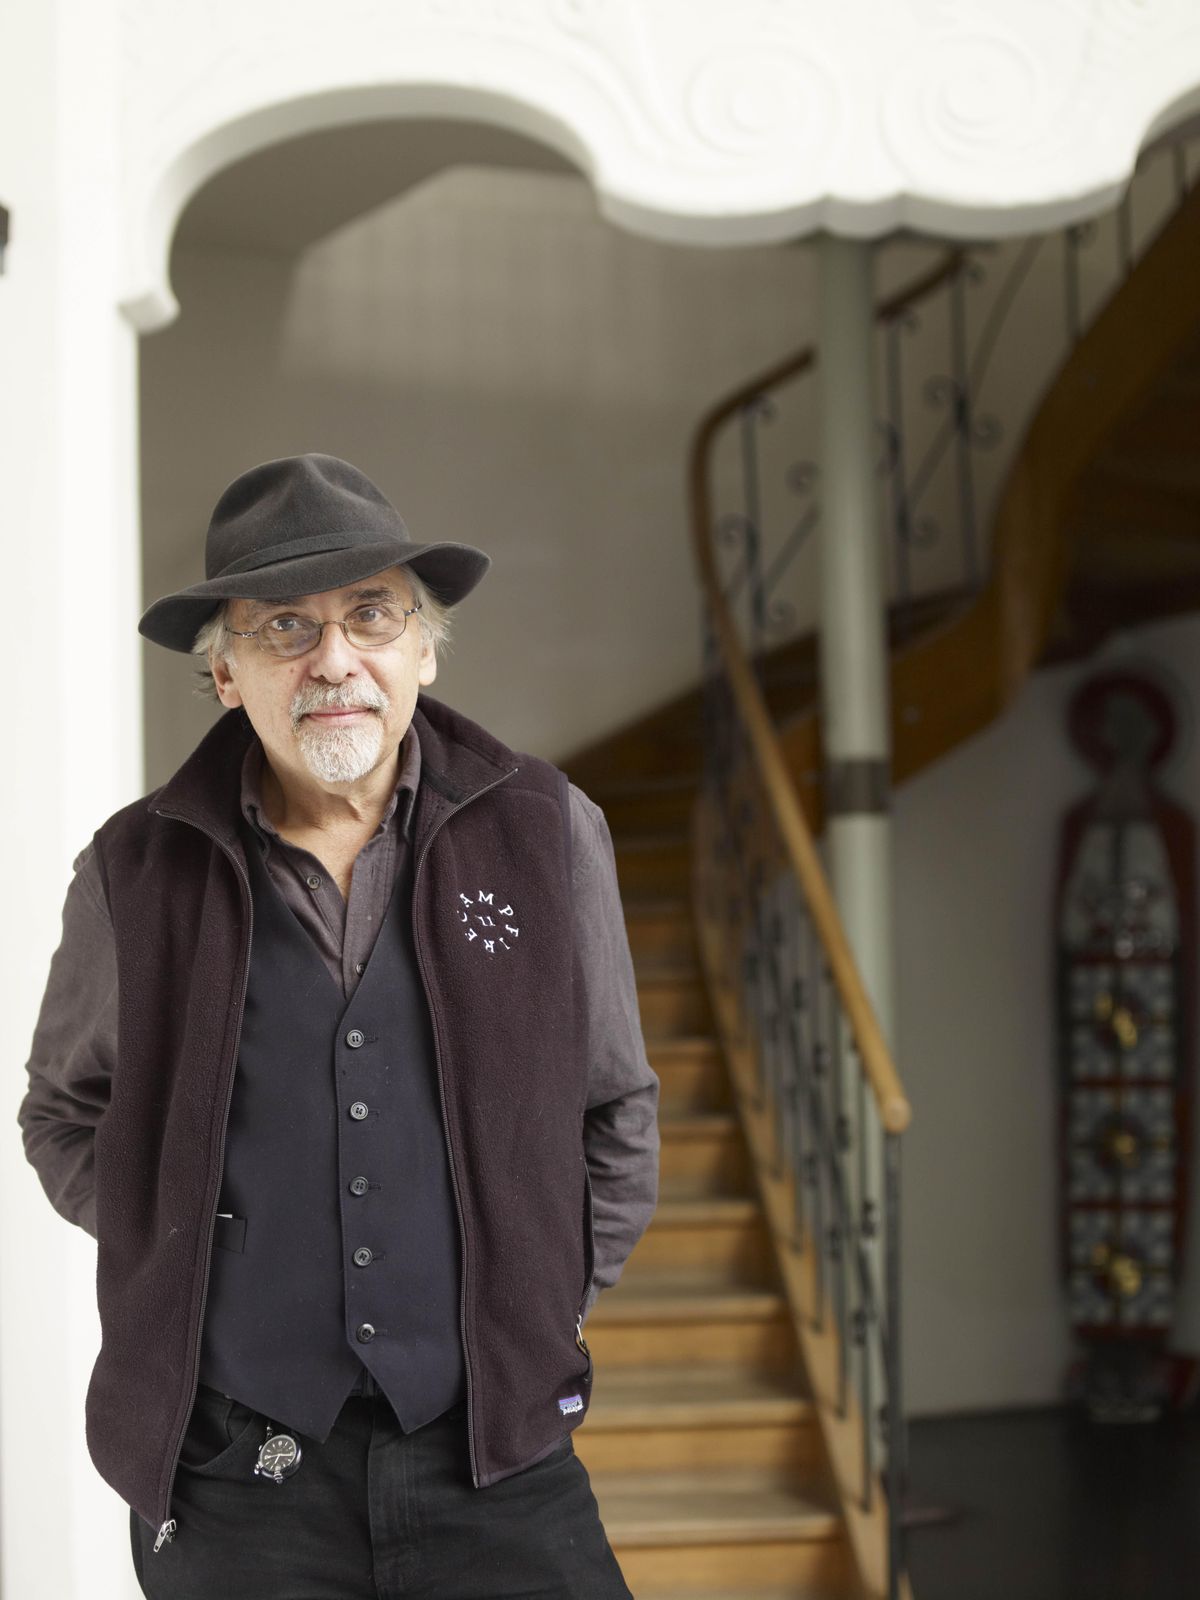 Art Spiegelman, cartoonist and comic author, at a photo shoot in Munich, Germany, in 2013. Spiegelman will give a free lecture Sept. 25 at Gonzaga University focused on the history and future of comics. (Enno Kapitza / Agentur Focus)